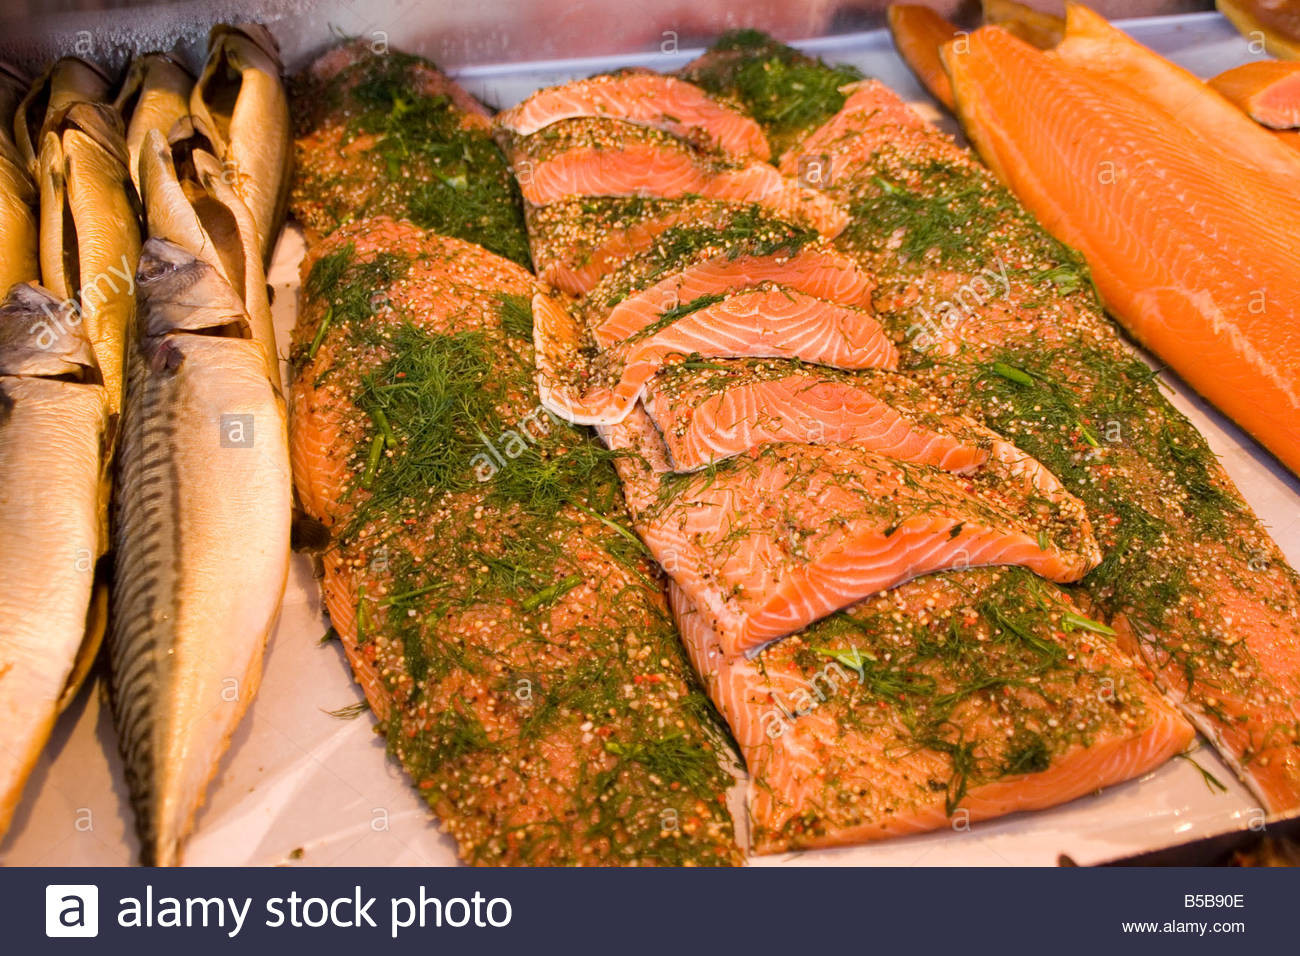 Smoked Salmon For Sale
 Smoked salmon with dill and herbs and other smoked fish